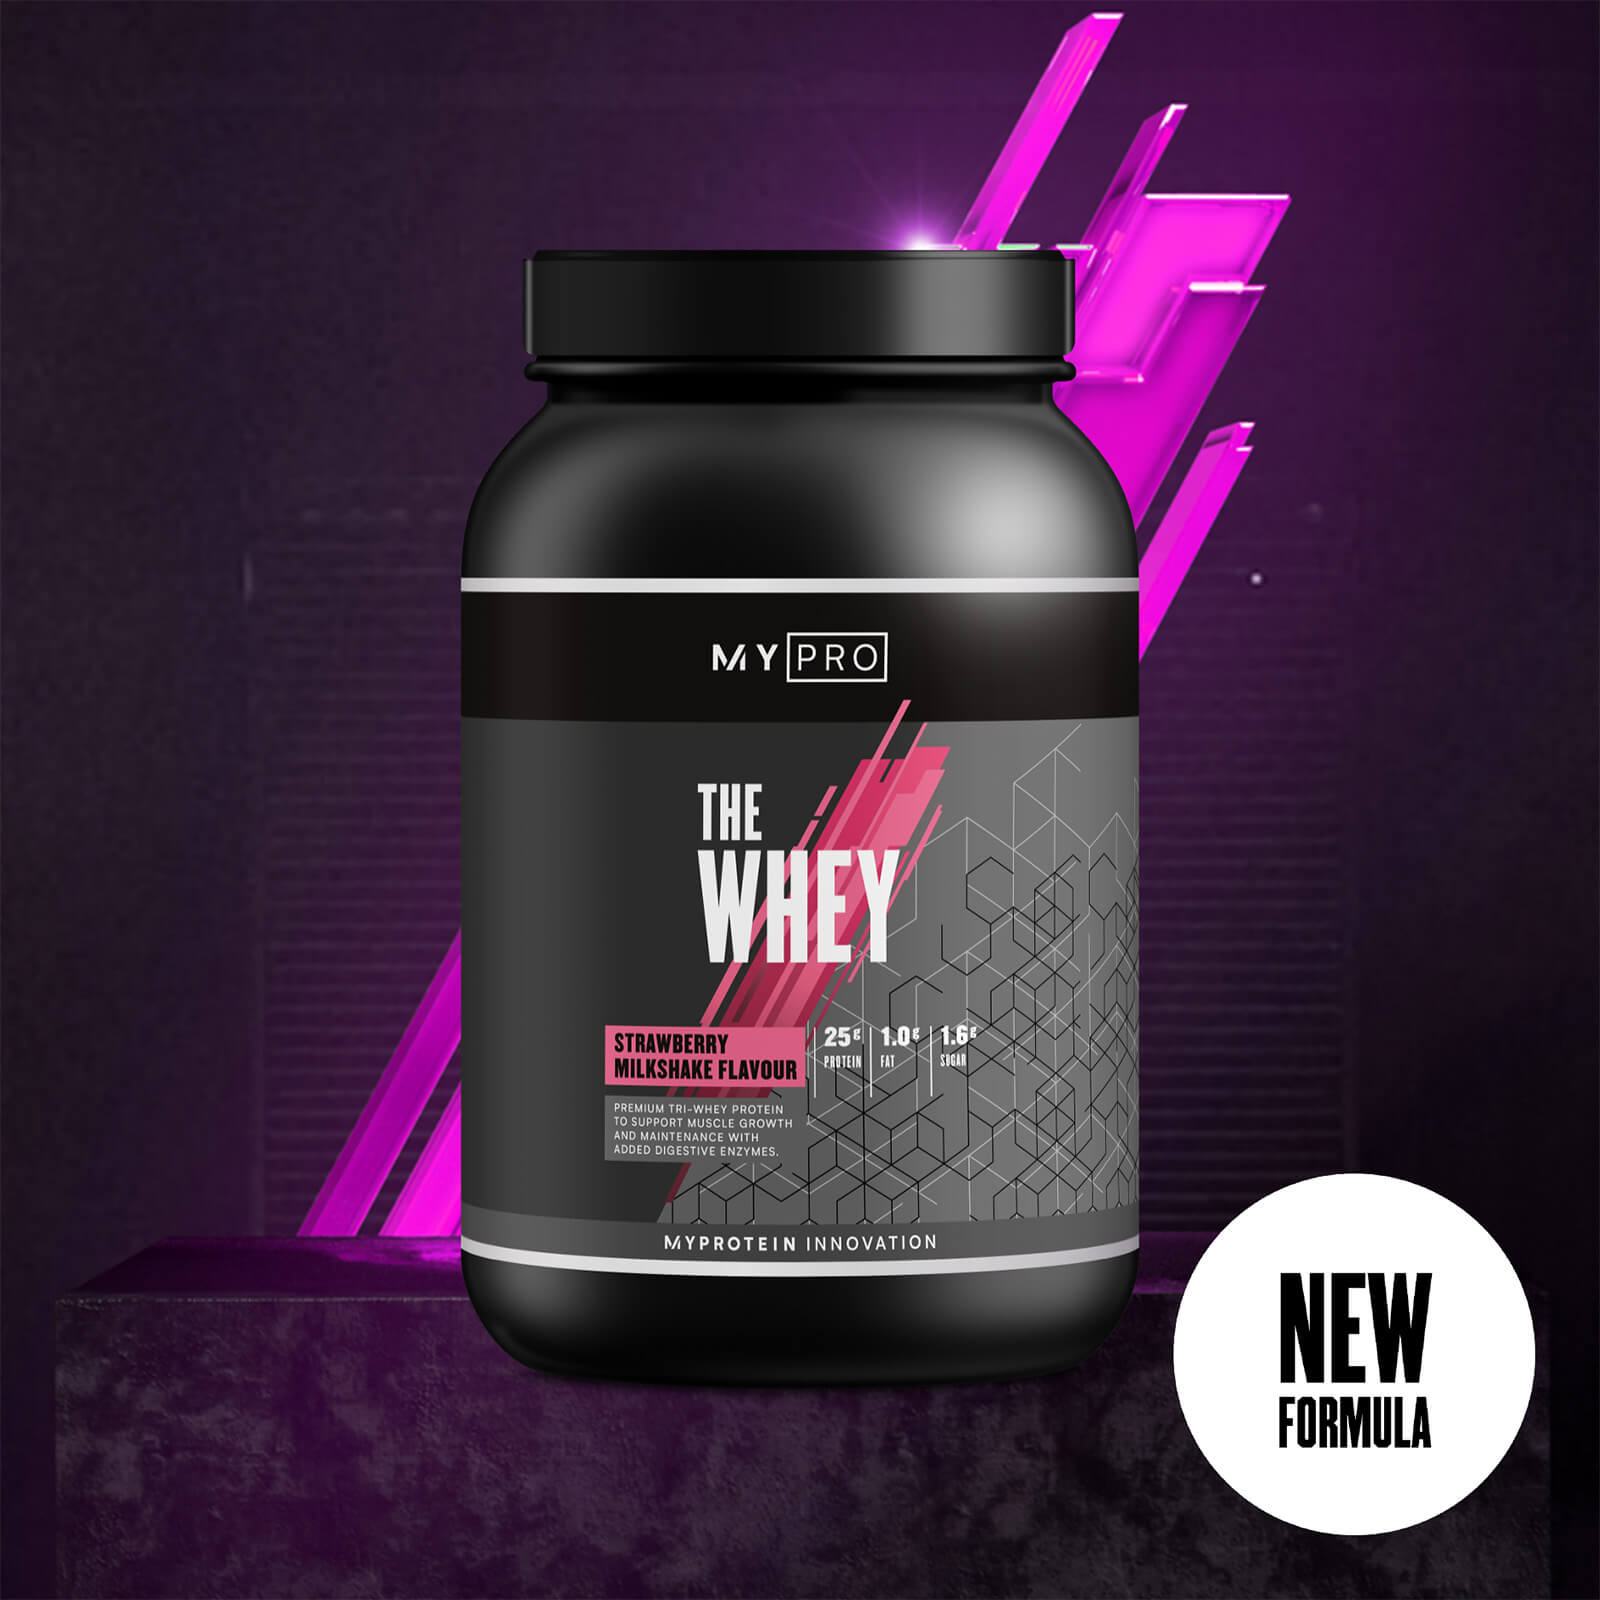 Myprotein THE Whey - 60servings - Strawberry